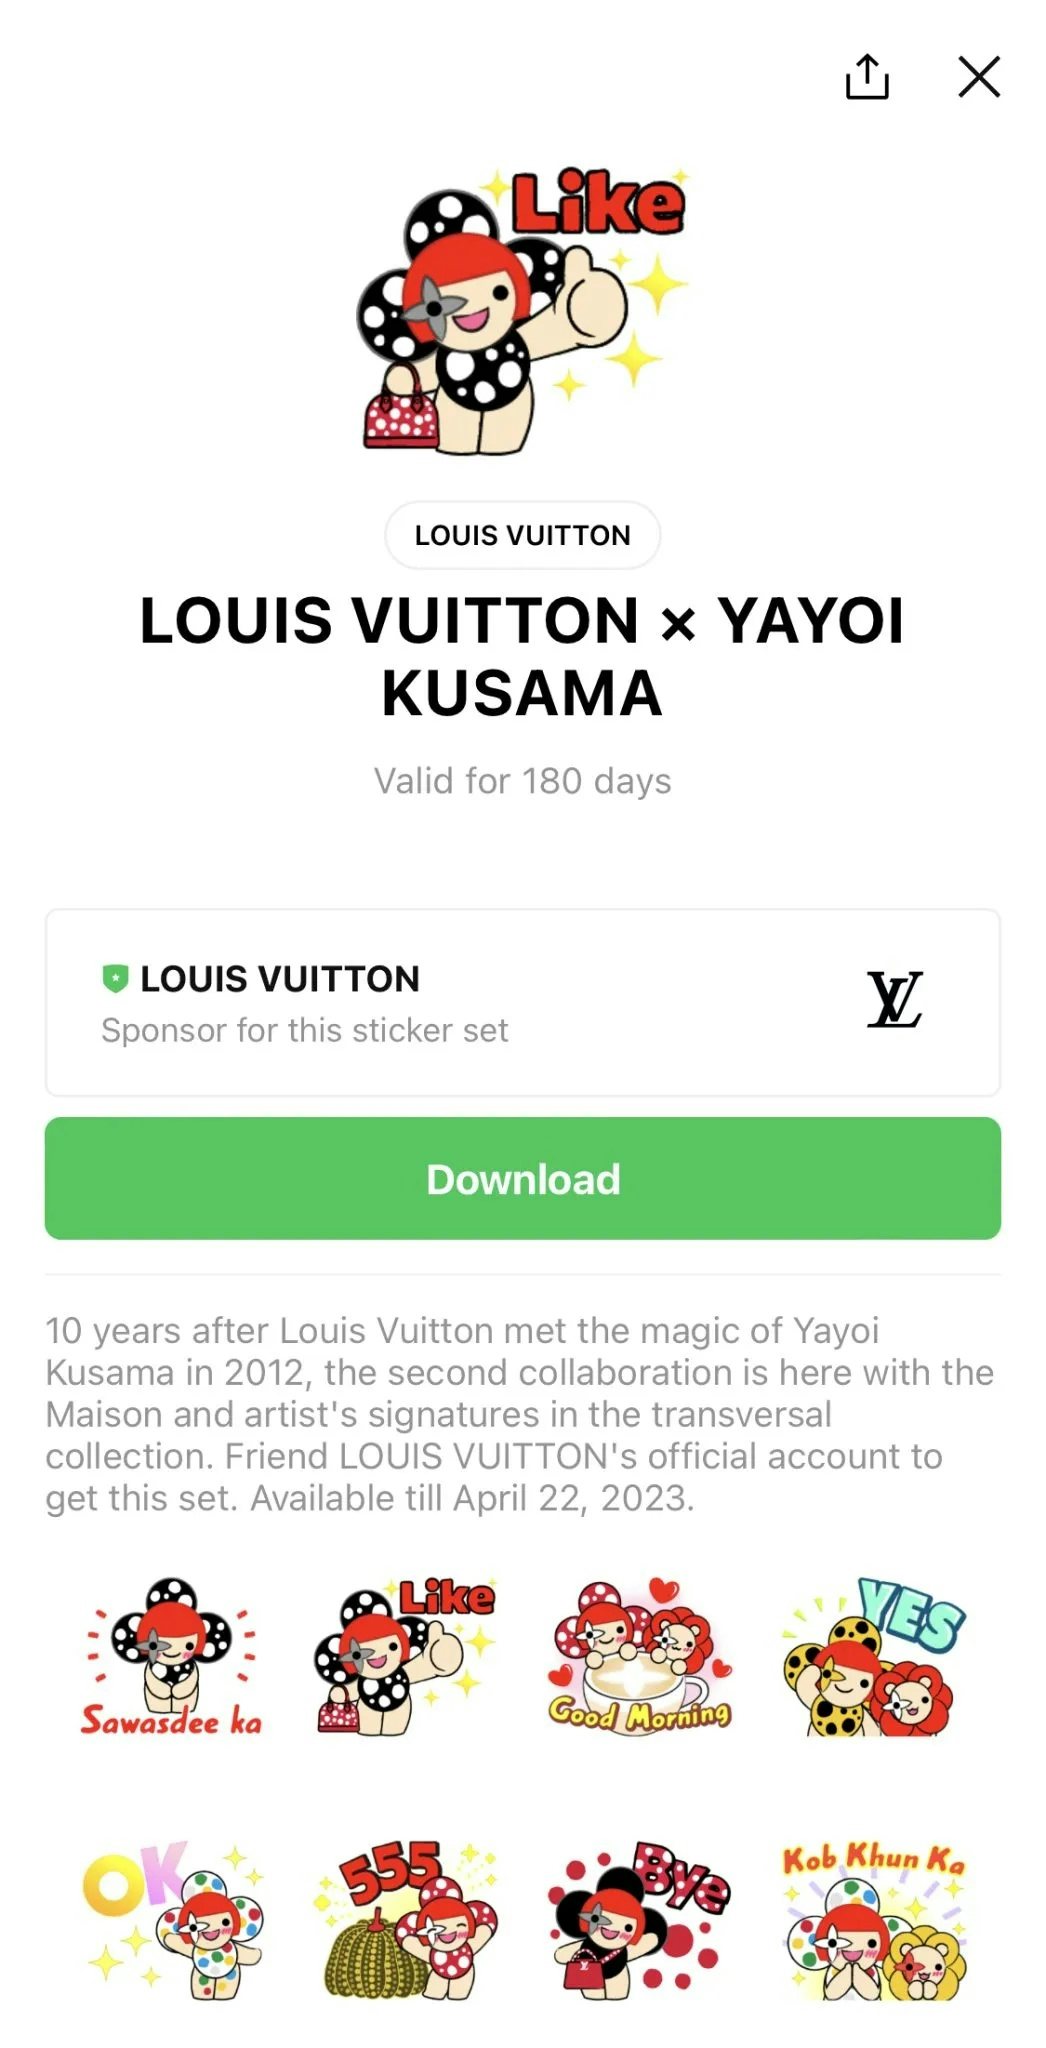 The Louis Vuitton x Yayoi Kusama collaboration included stickers for Line users in Thailand. Photo: Line